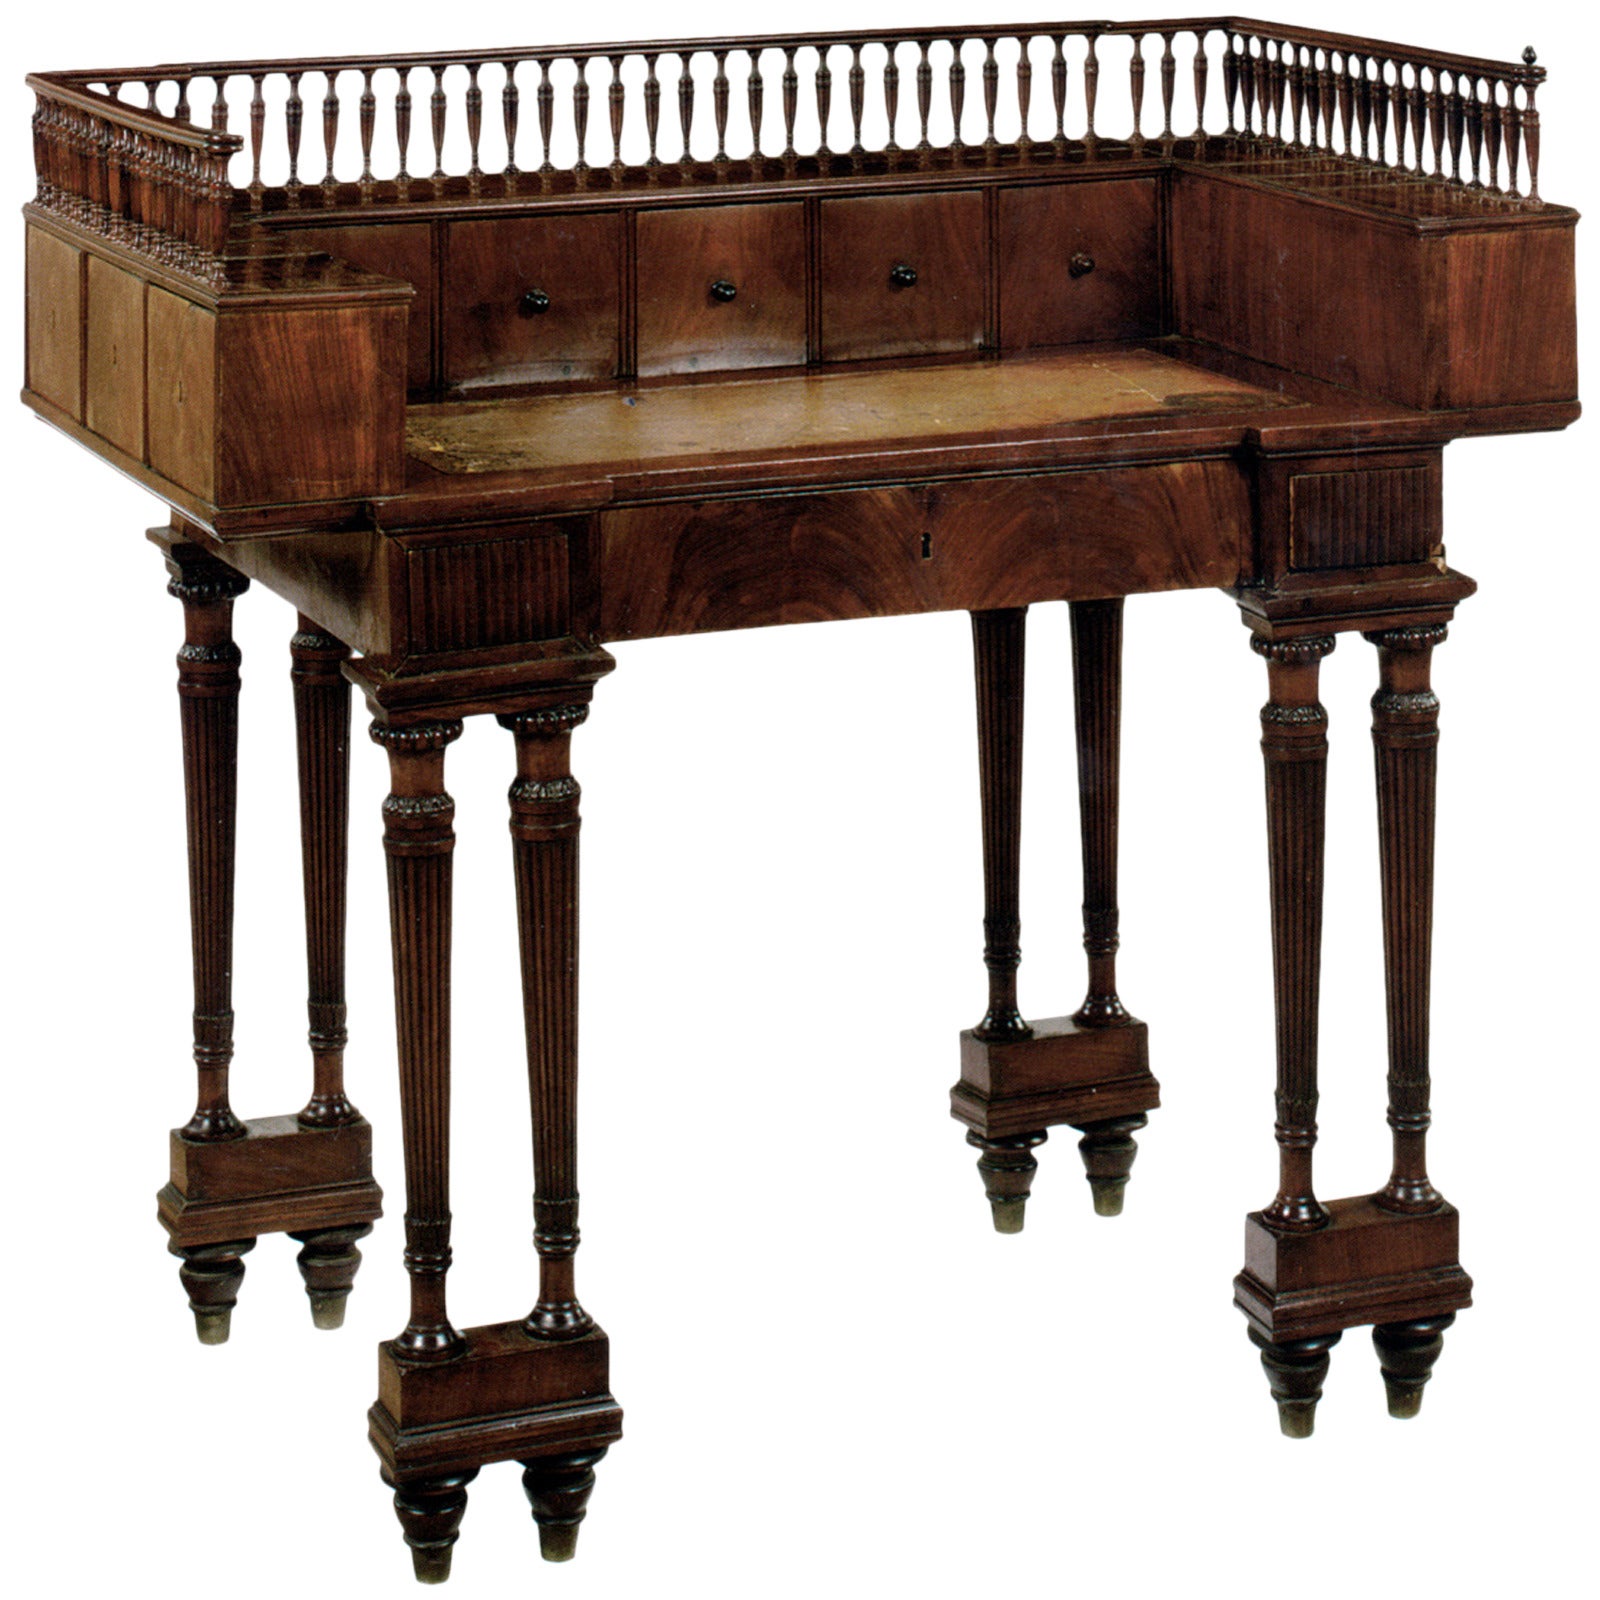 Neoclassical19th century mahogany Writing Table or Desk